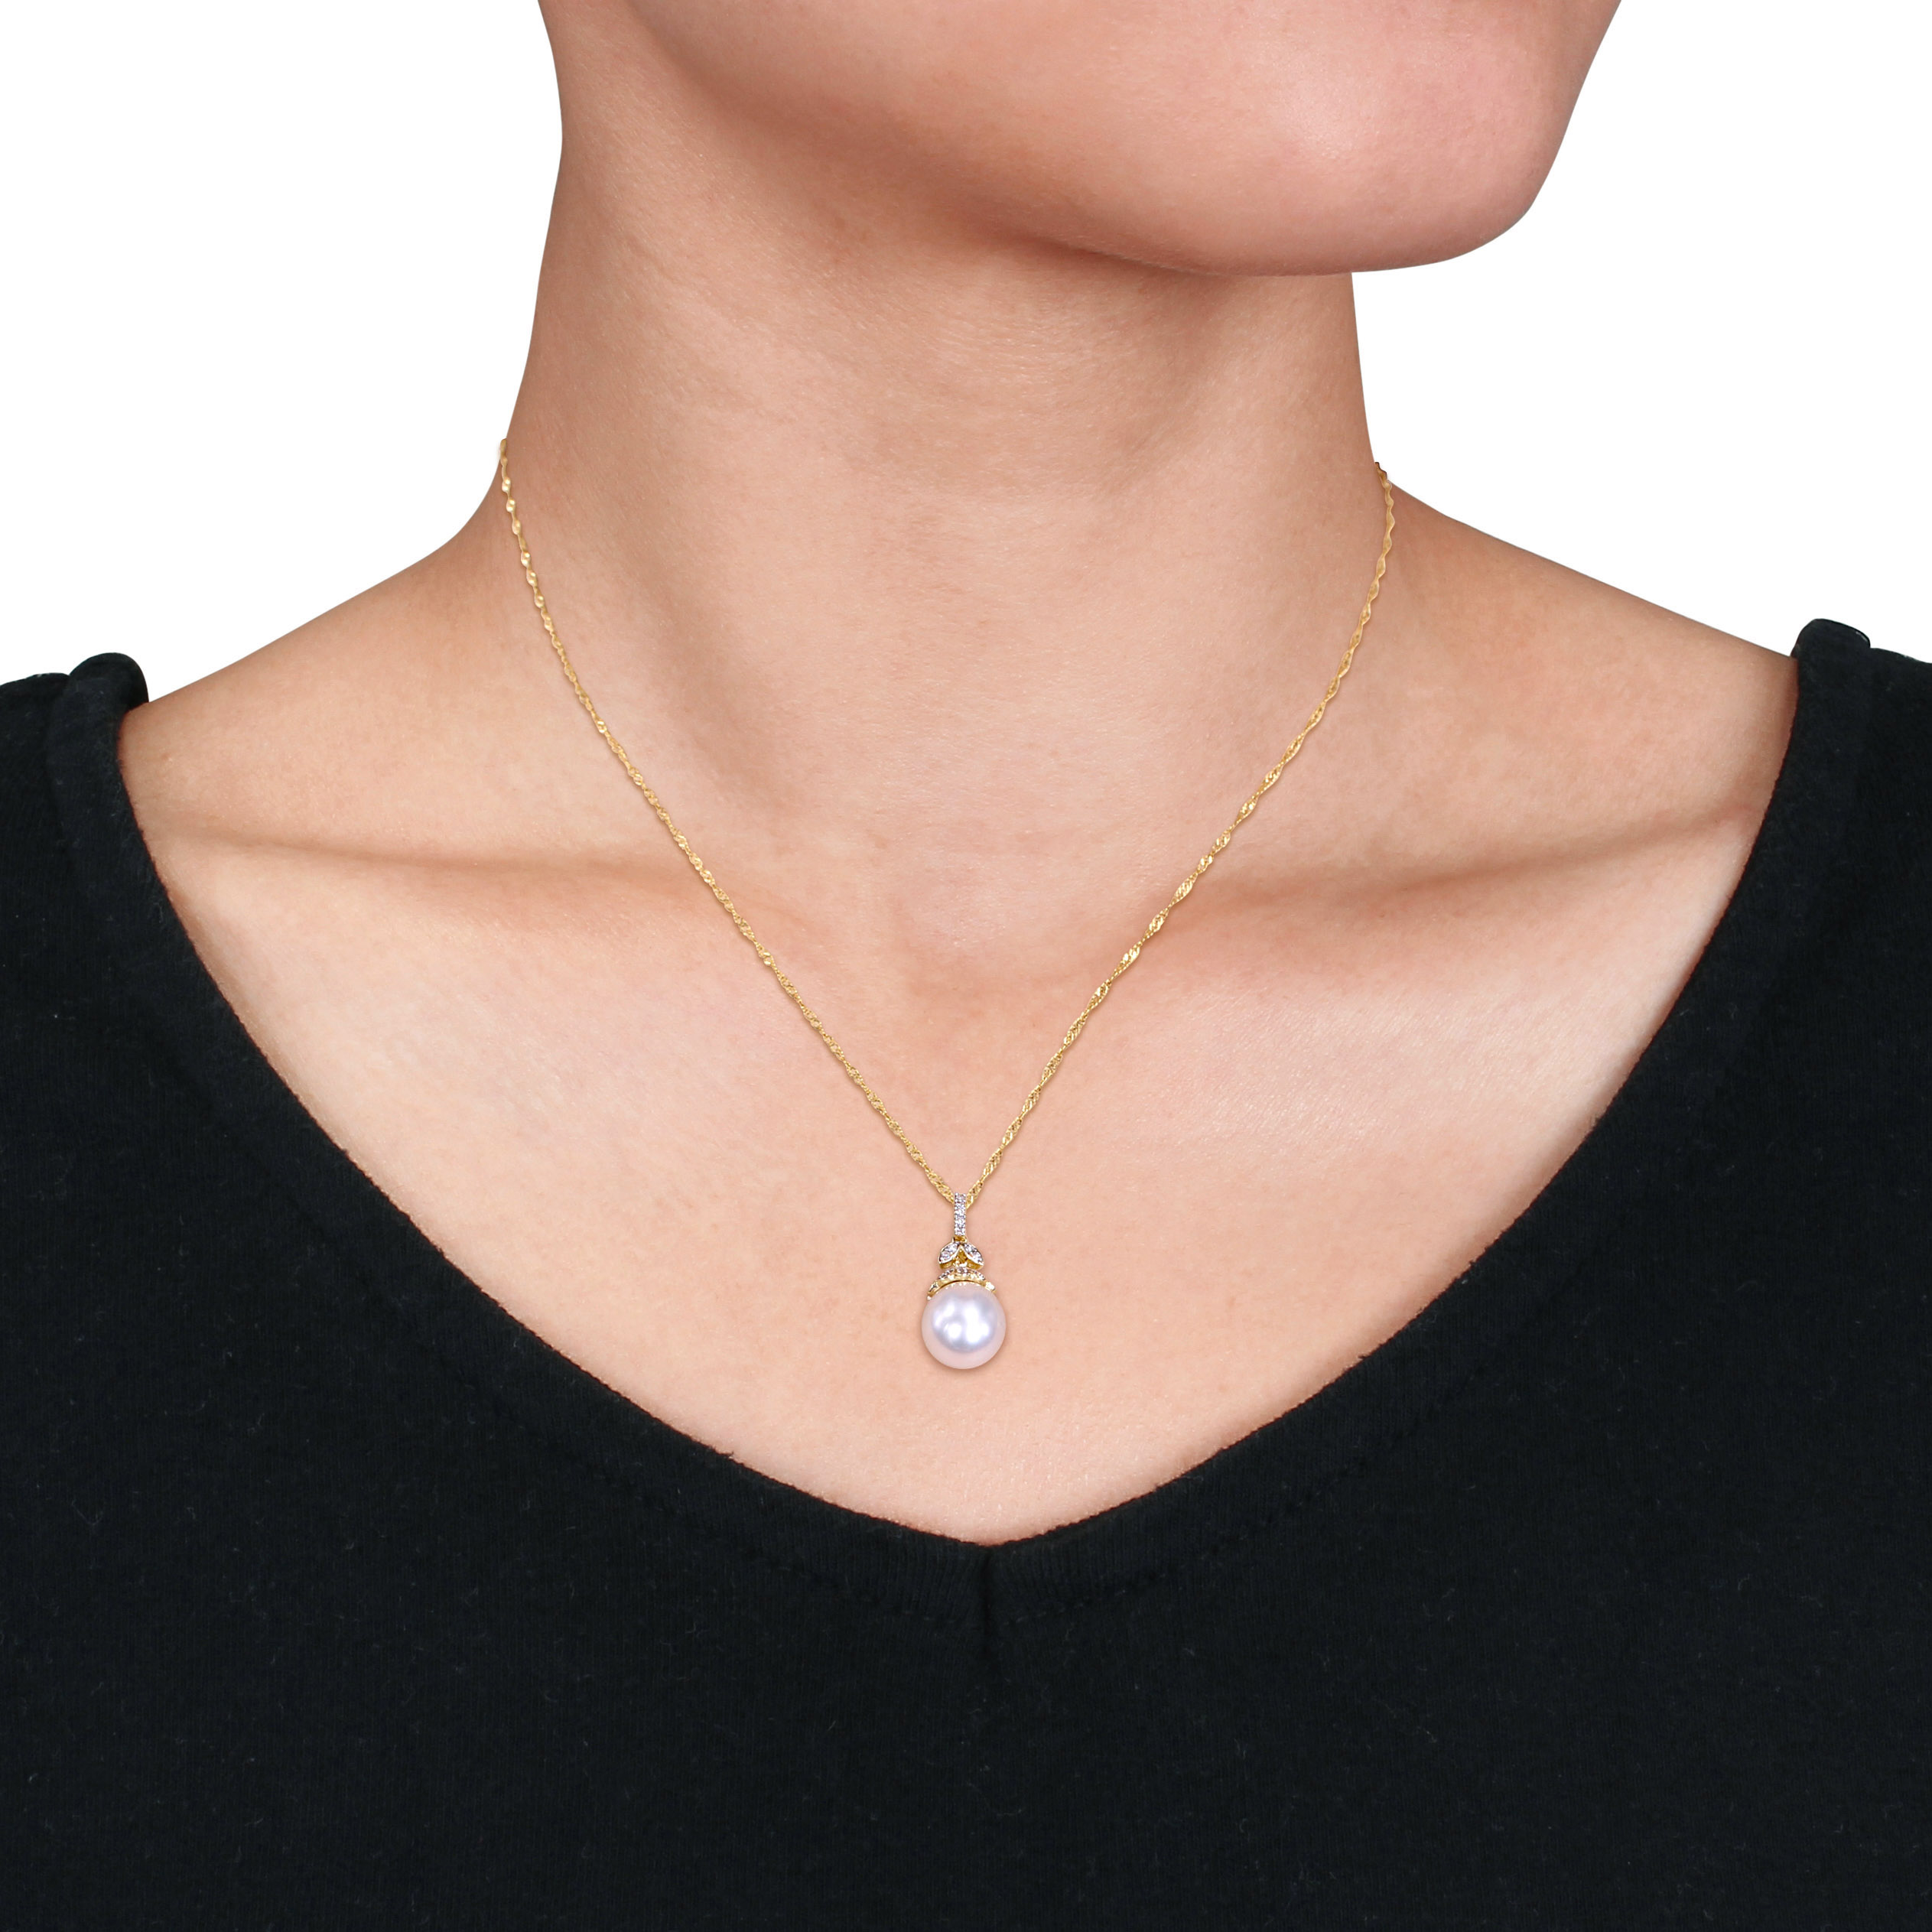 10-10.5 MM South Sea Pearl and 1/10 CT TW Diamond Floral Drop Pendant with Chain in 14k Yellow Gold